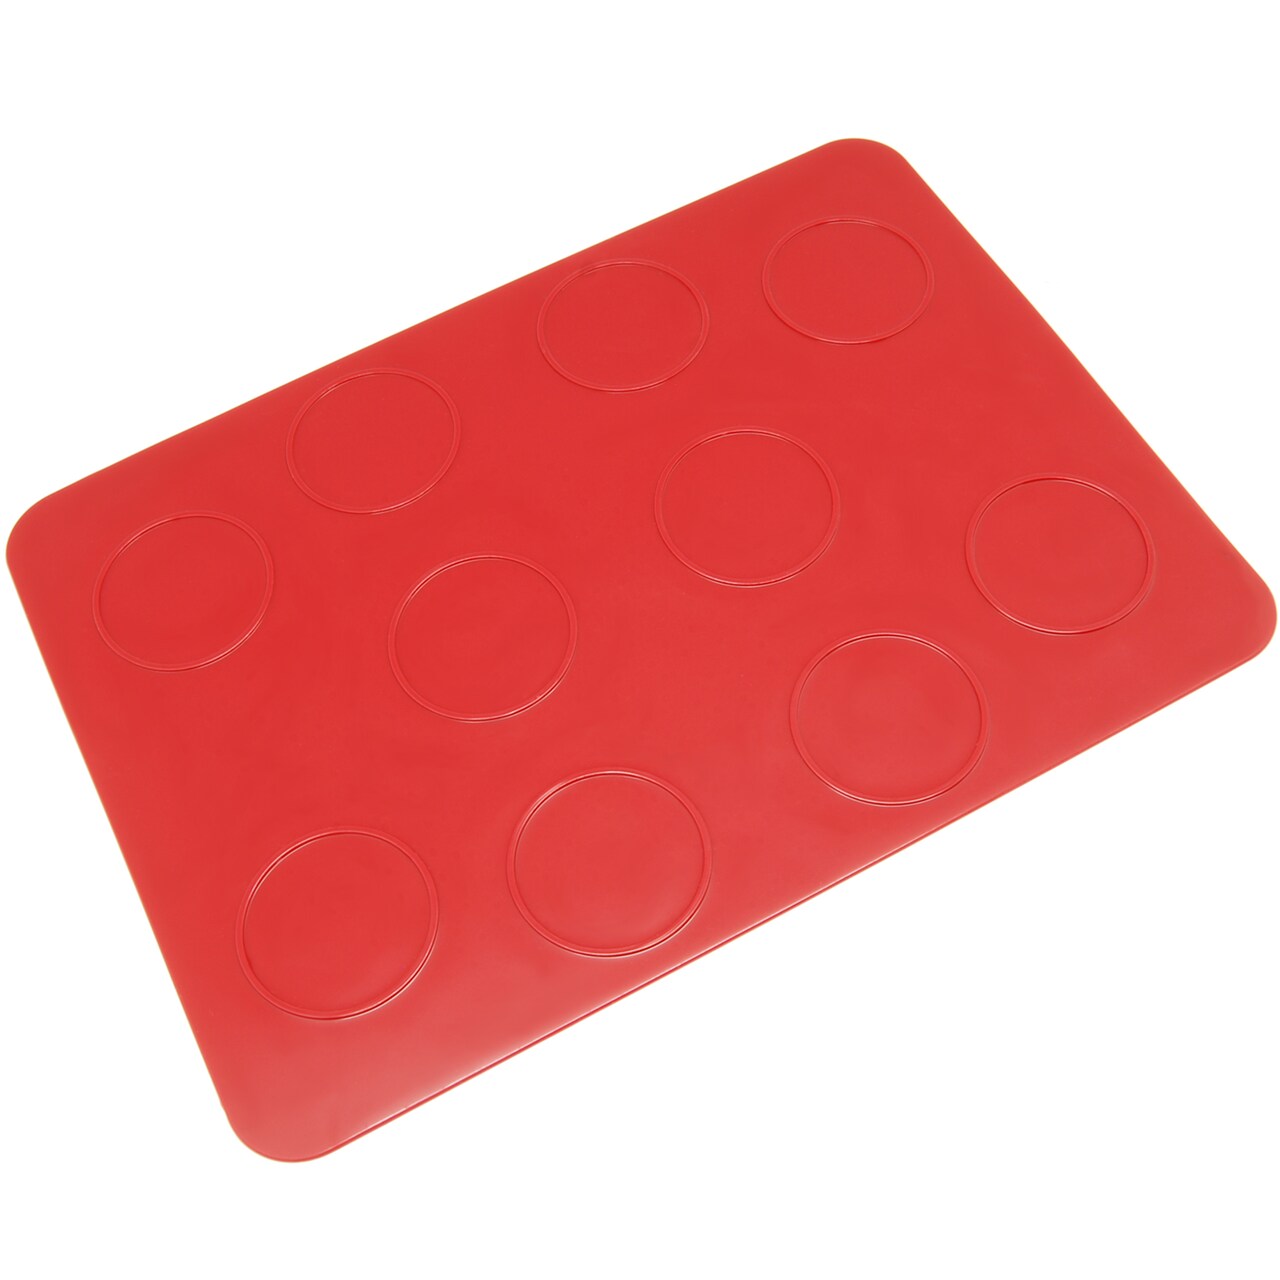 Freshware Silicone Baking Mat for Macaron, Whoopie Pie, Cookie and